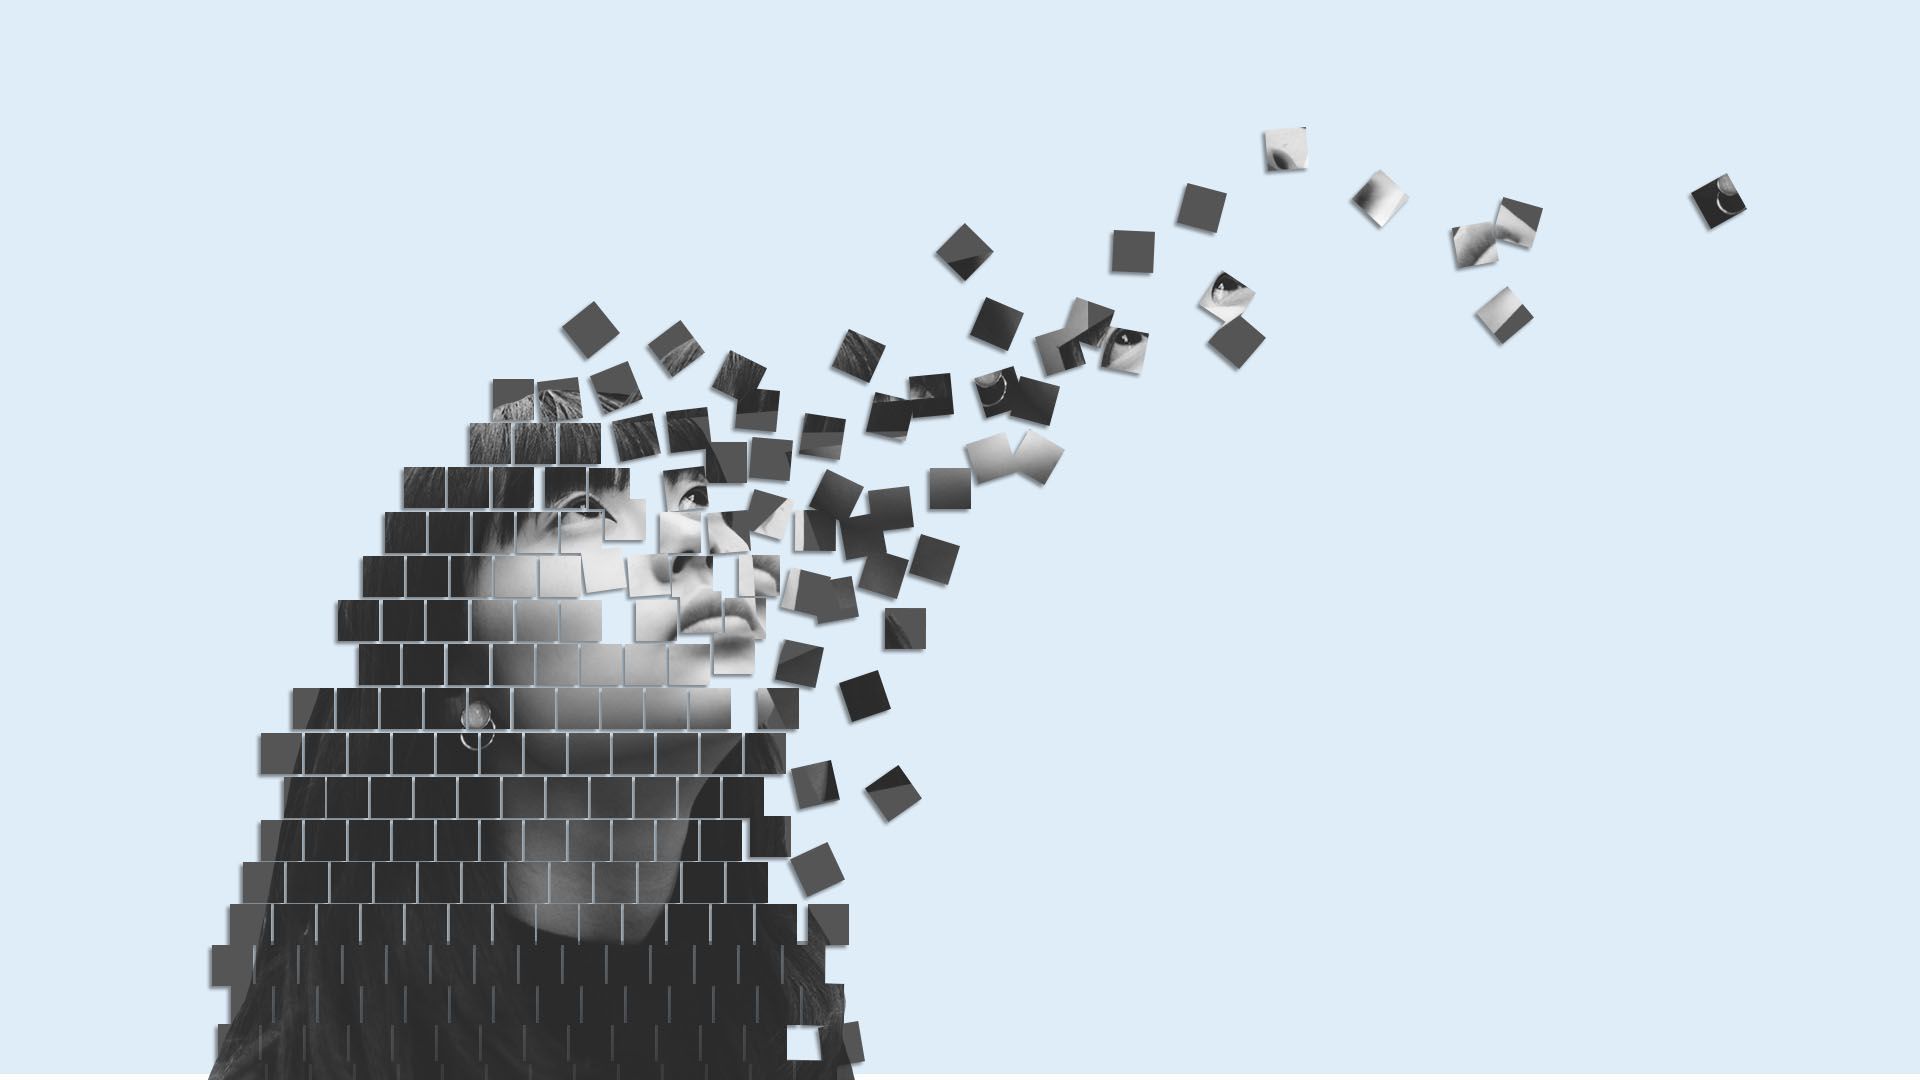 A pixelated person disintegrating.